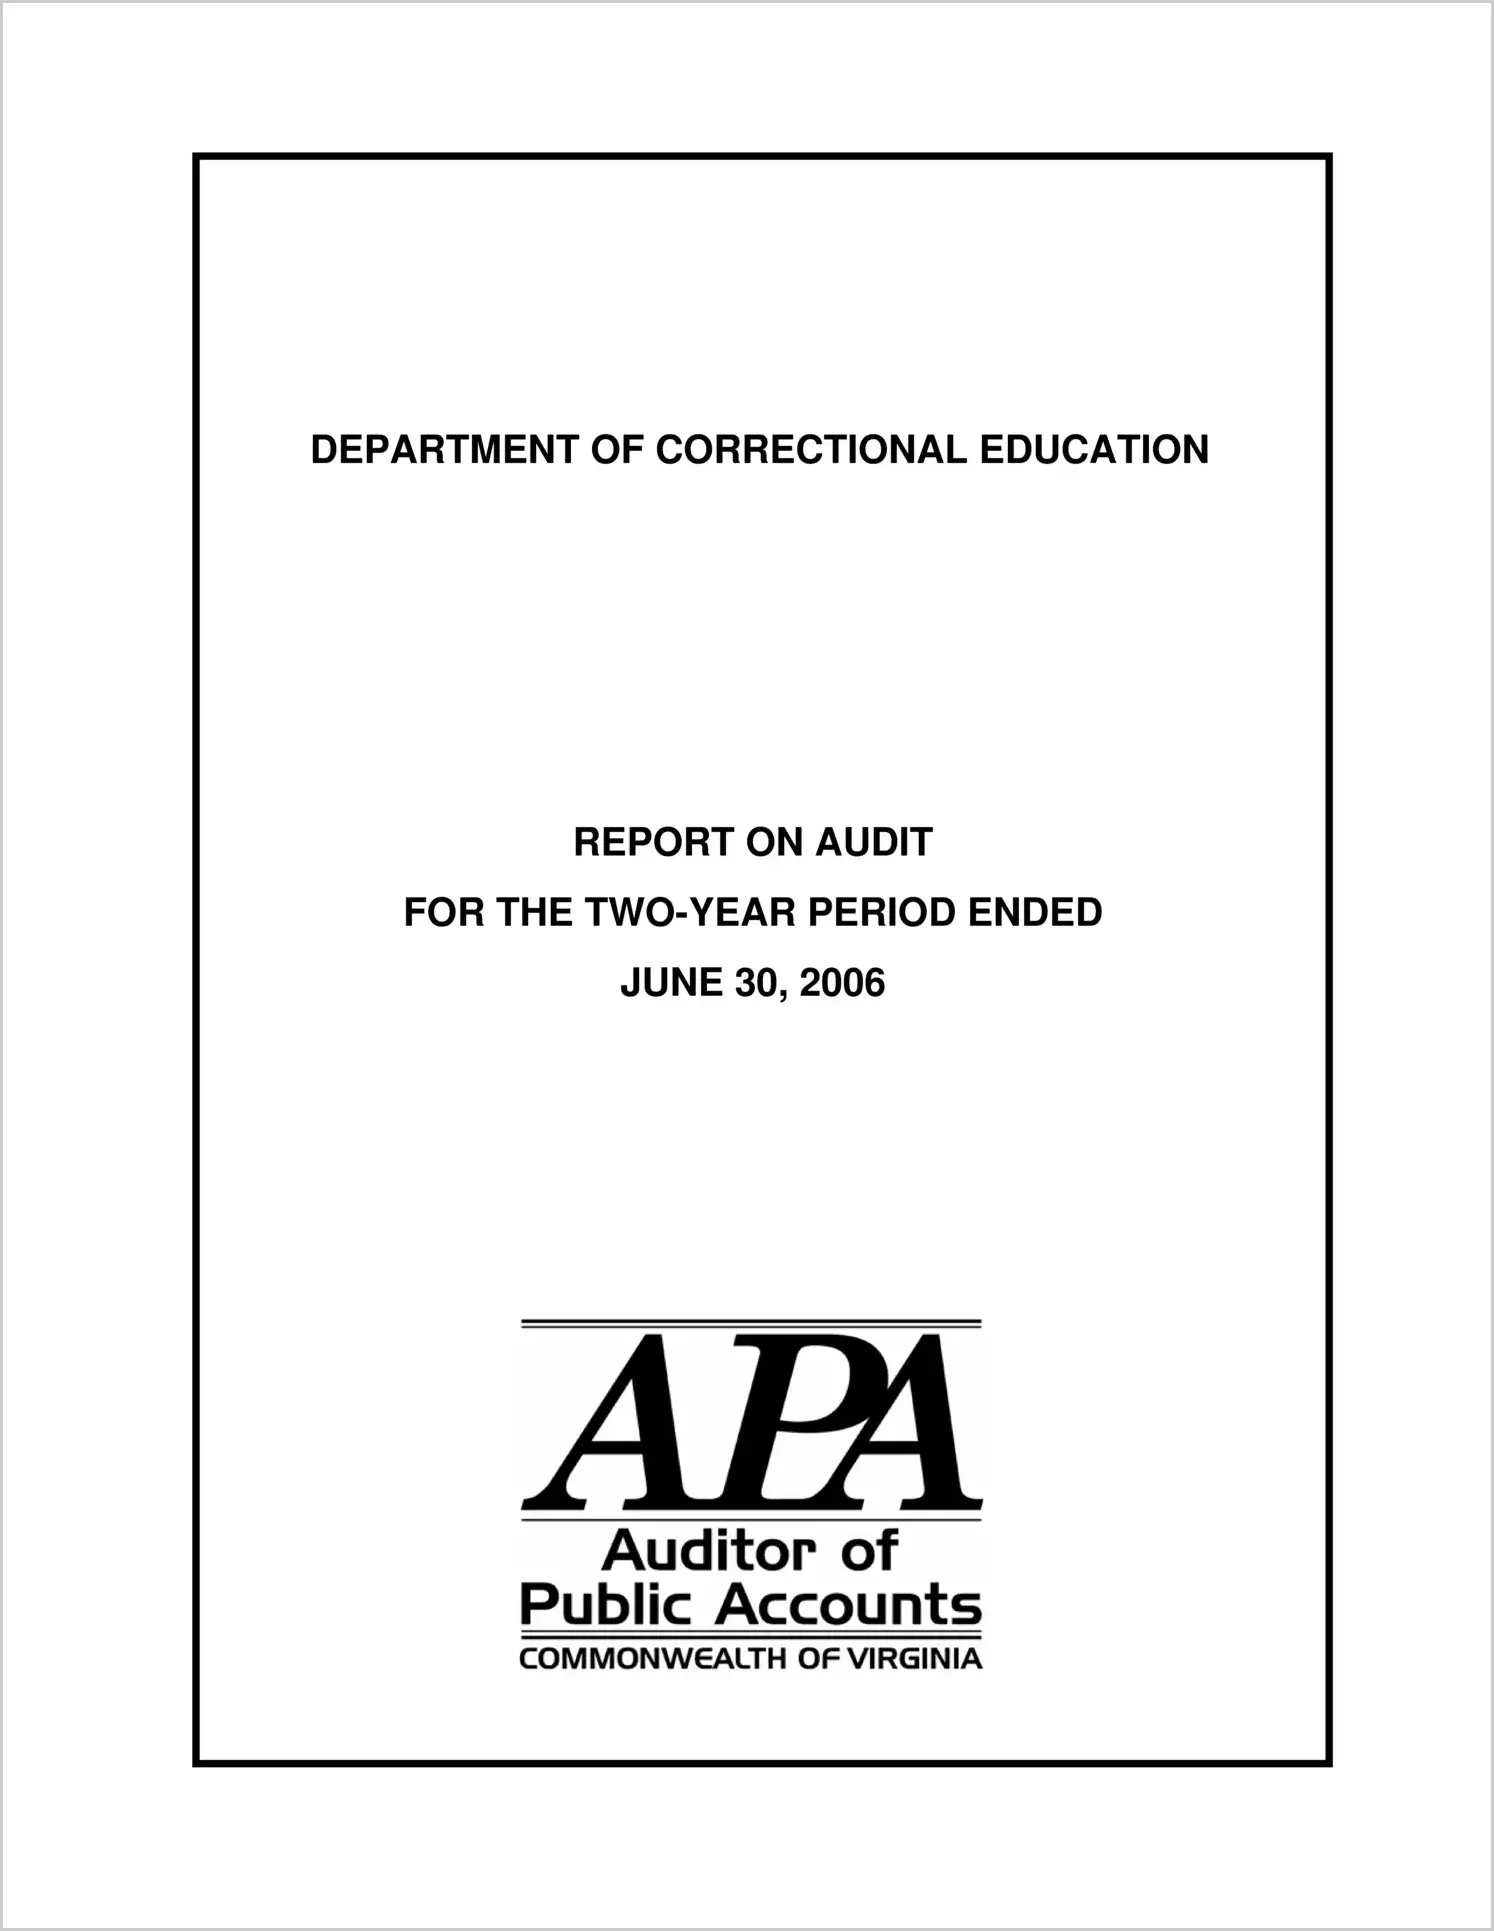 Department of Correctional Education for the two-year period ended June 30, 2006